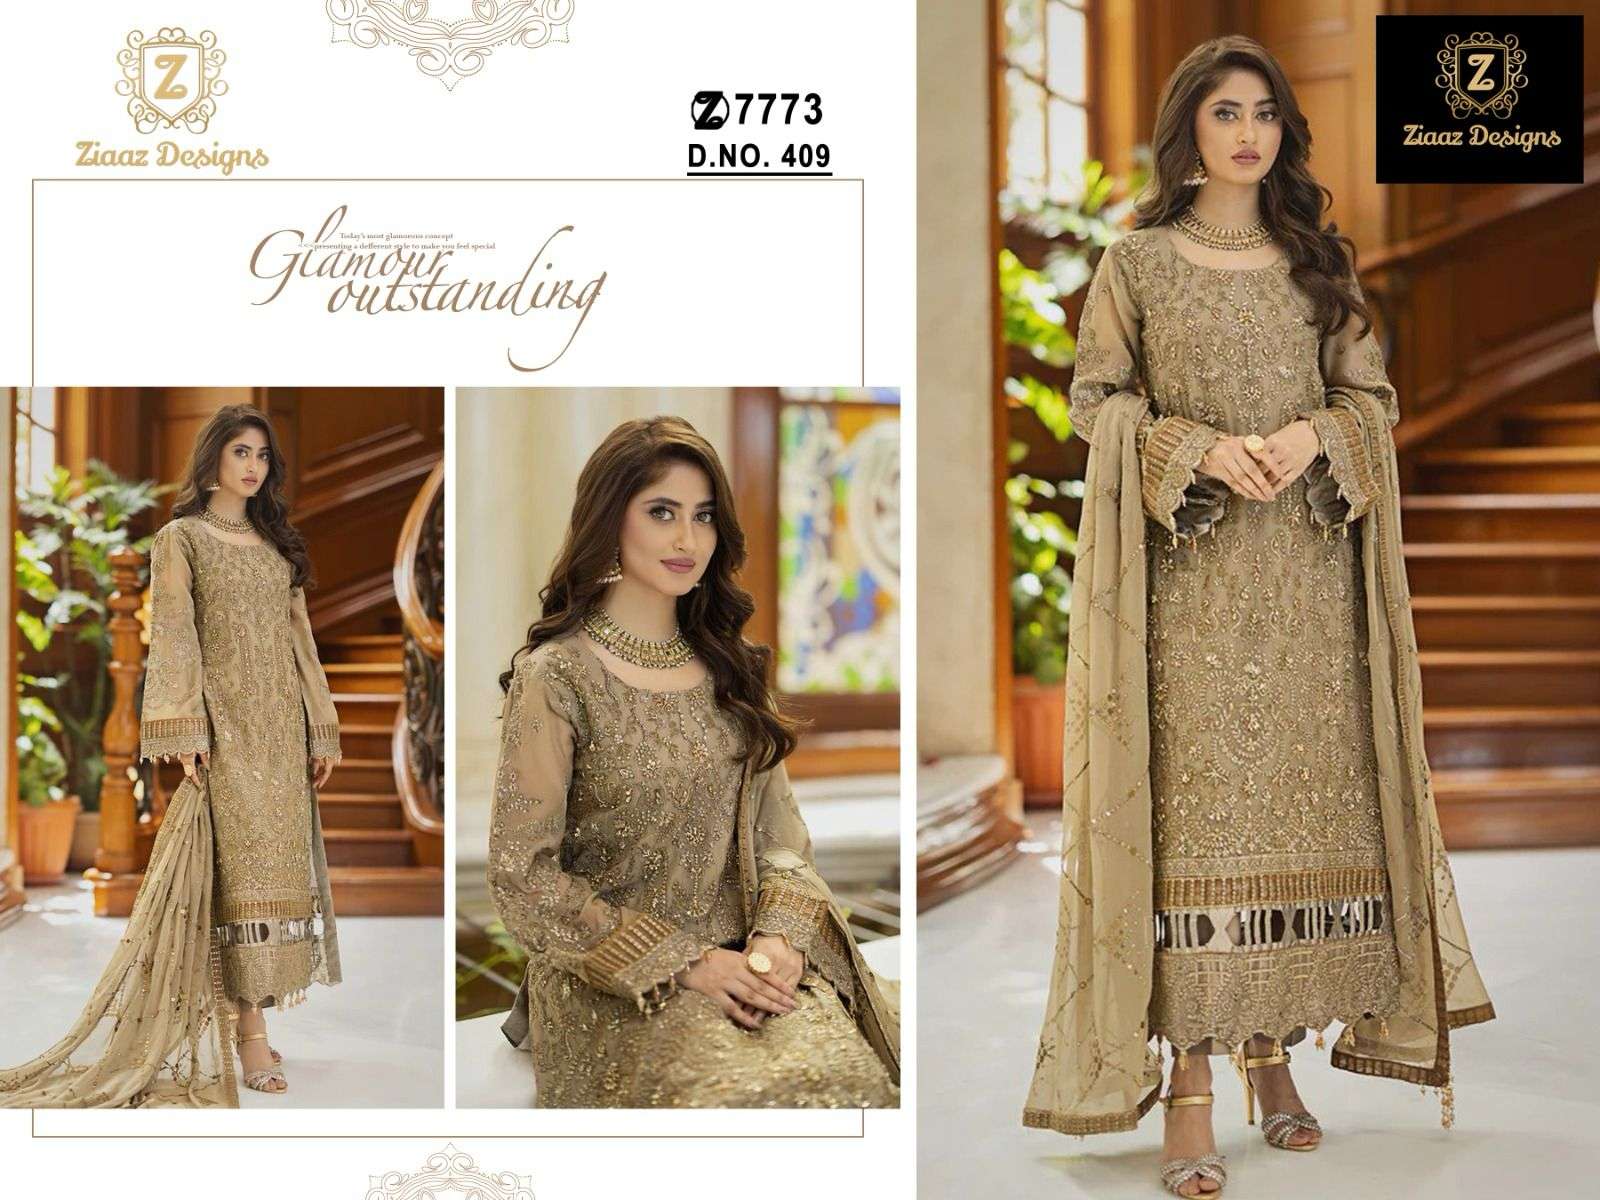 Ziaaz 409 Georgette EMbroidery work Pakistani SUits Supplier...